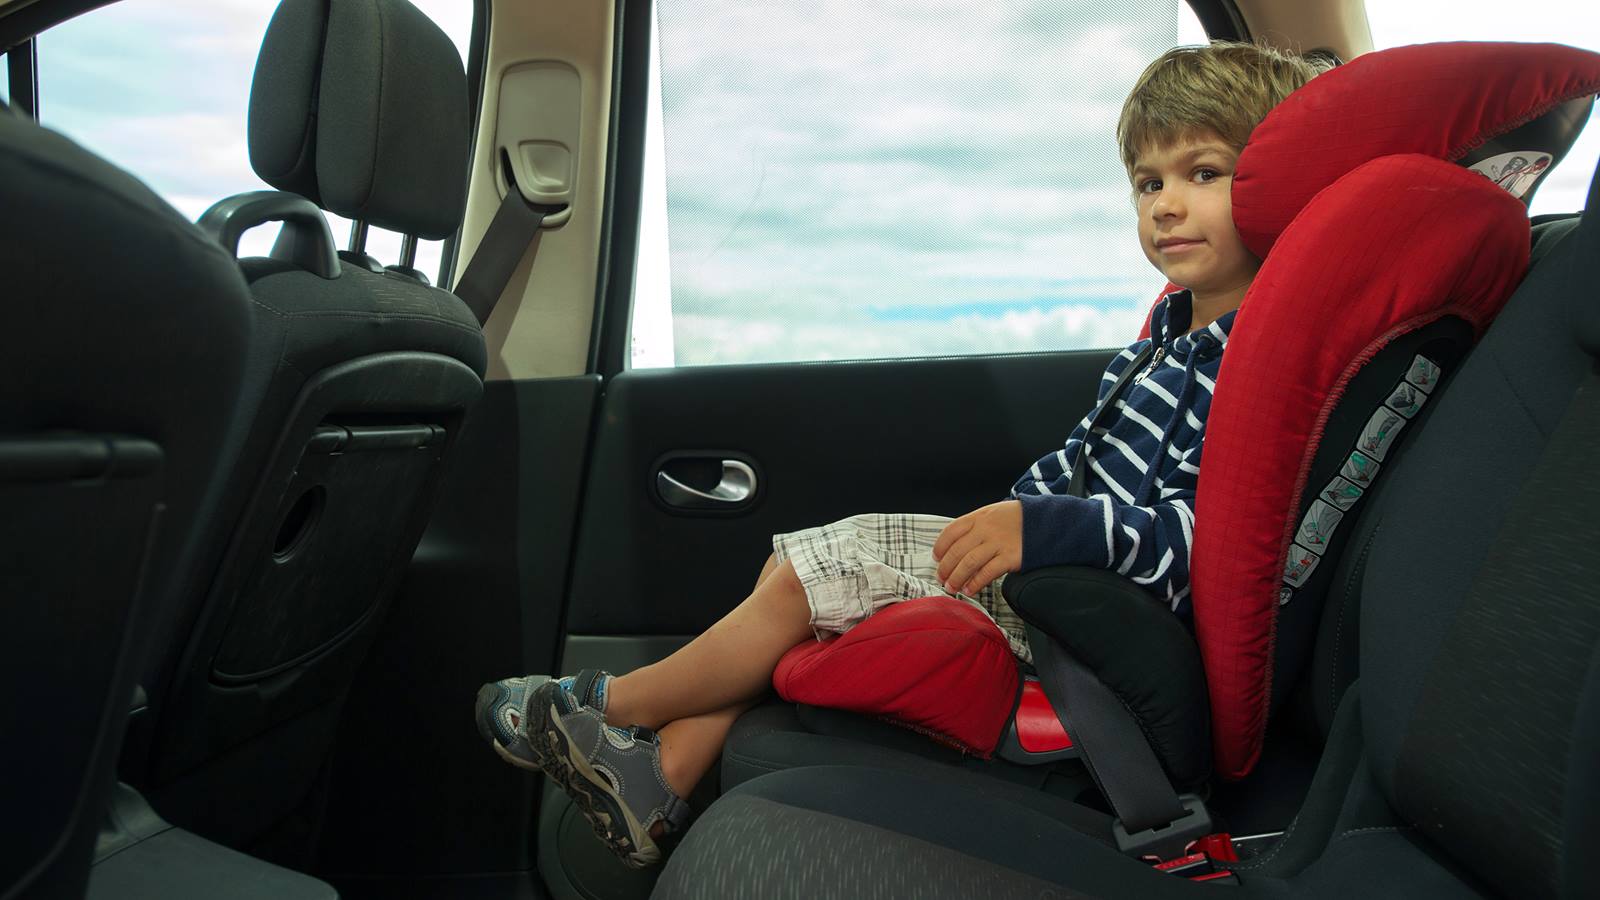 Child Ready To Move Into A Booster Seat, How Many Years Can A Car Seat Be Used